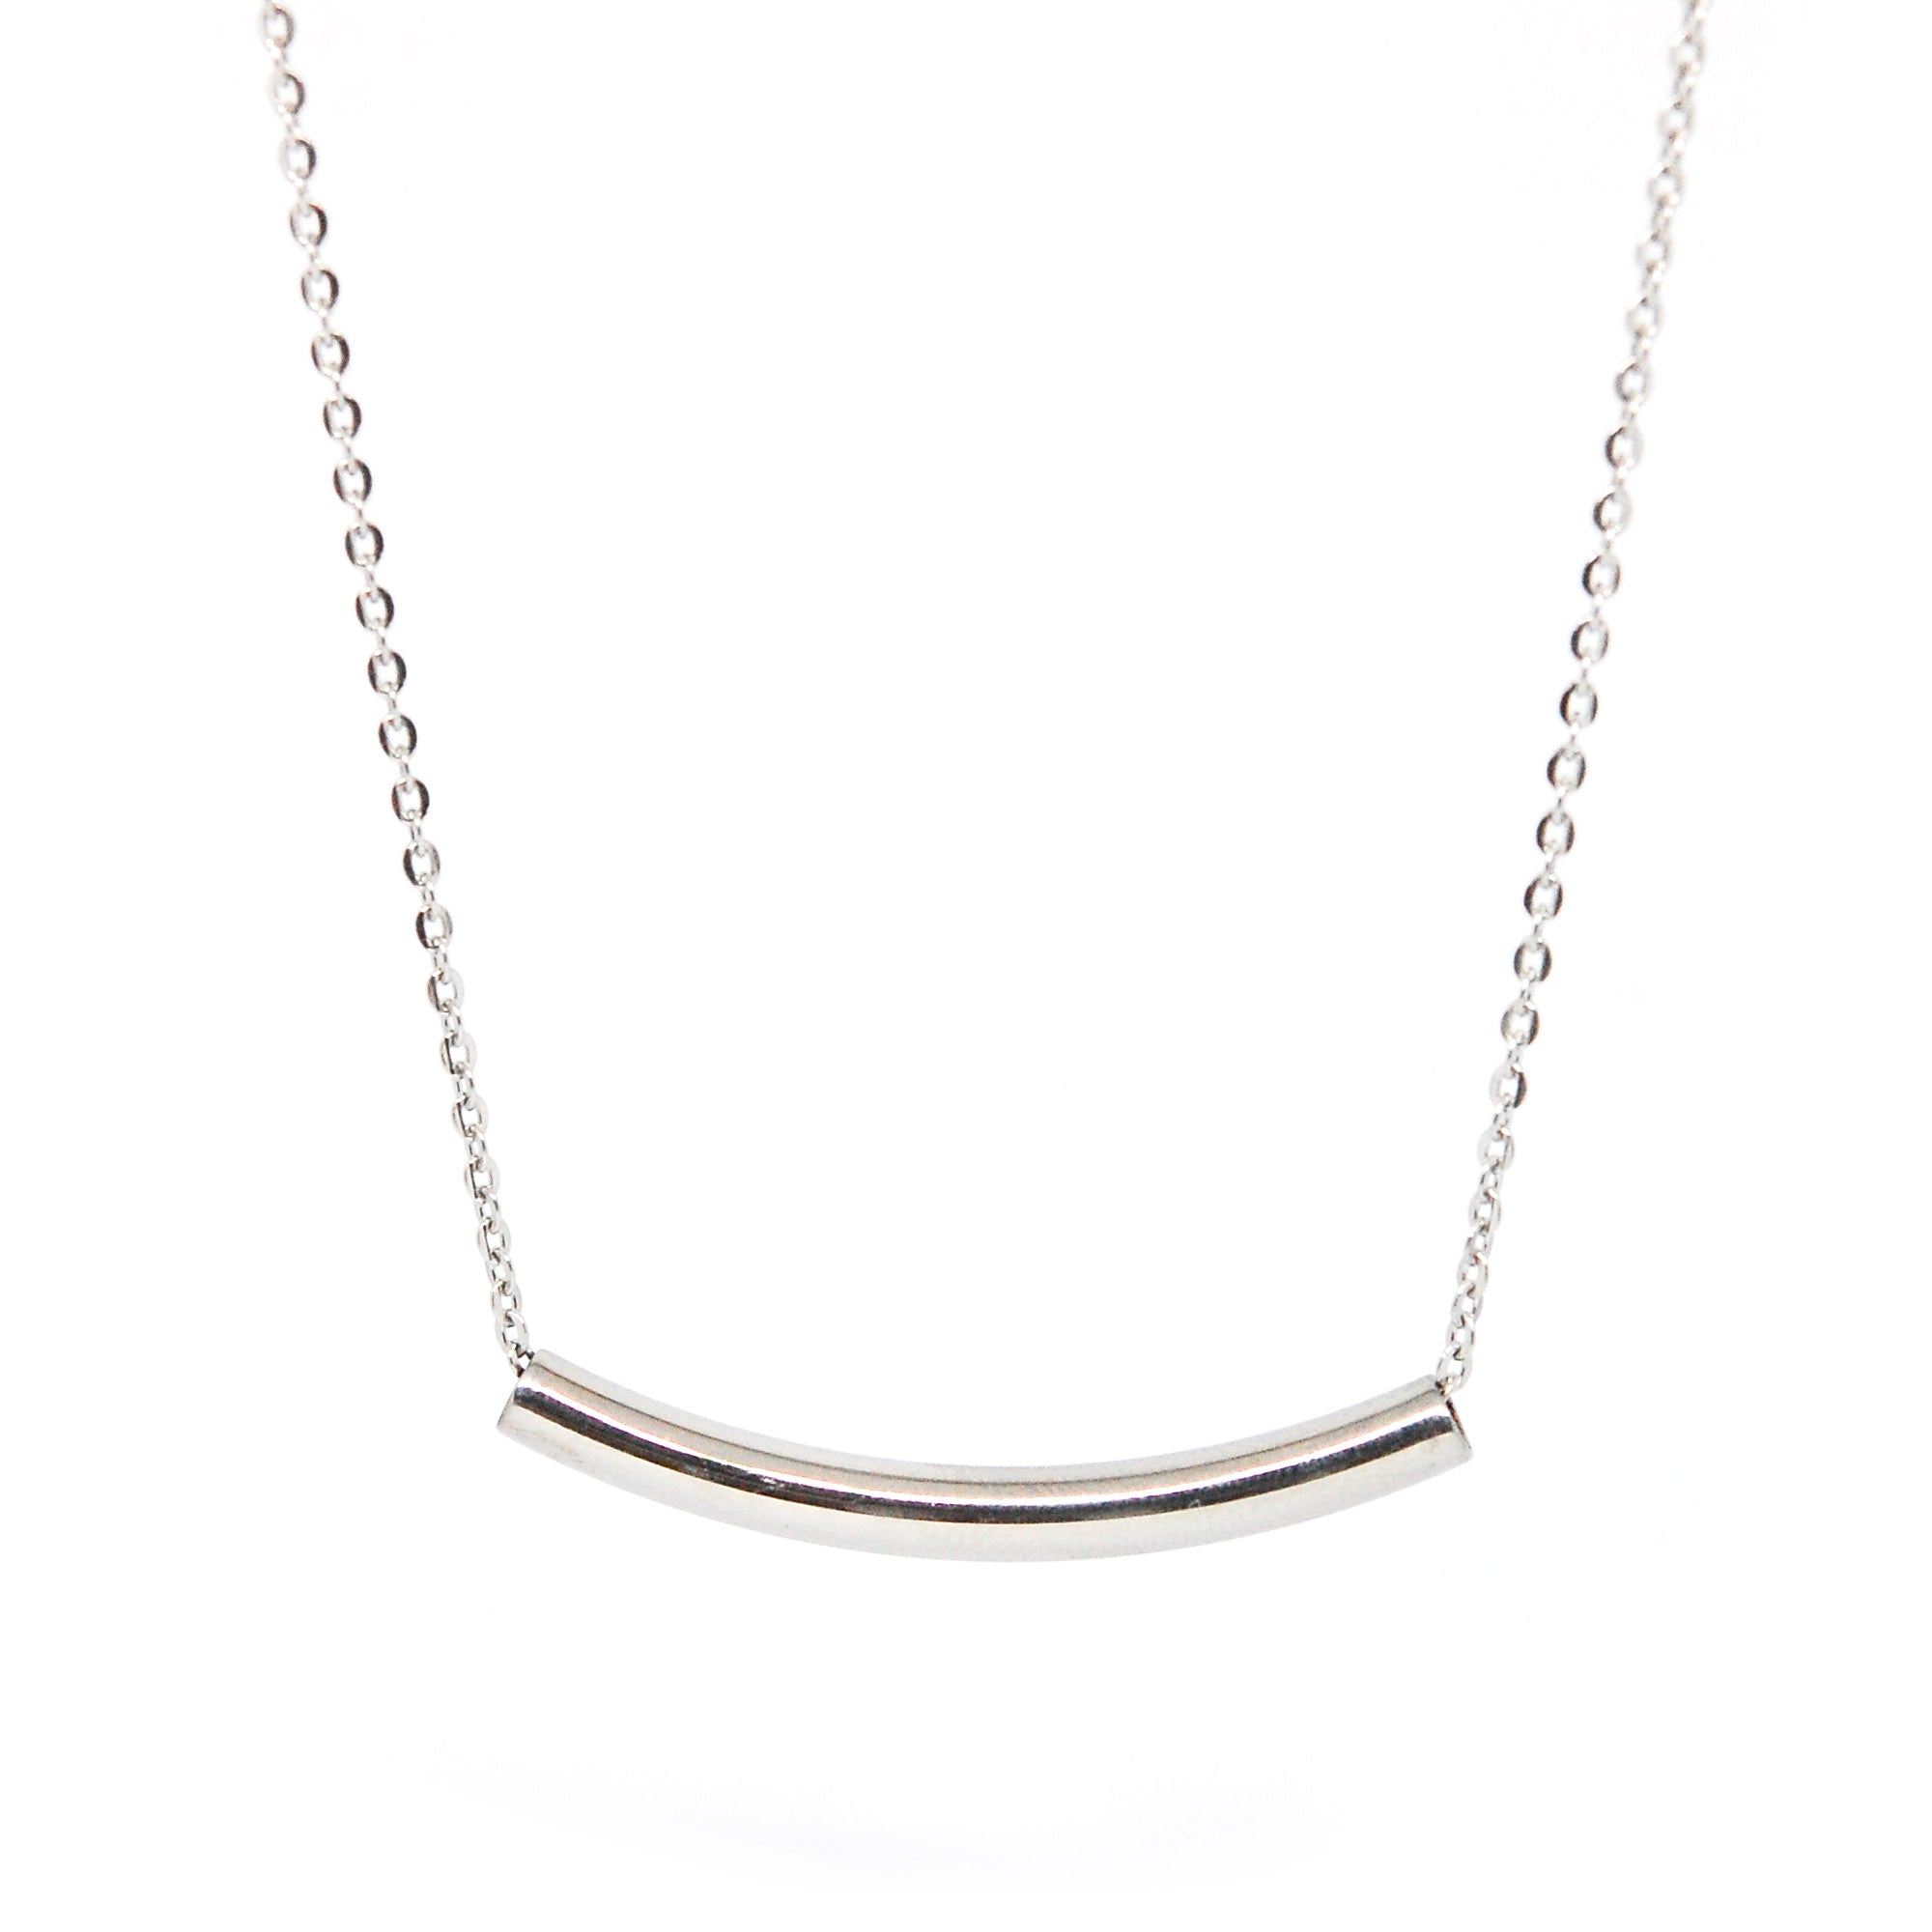 ESN 5701: Curved ID Bar Necklace w/ 18" + 2" Med Link Chain